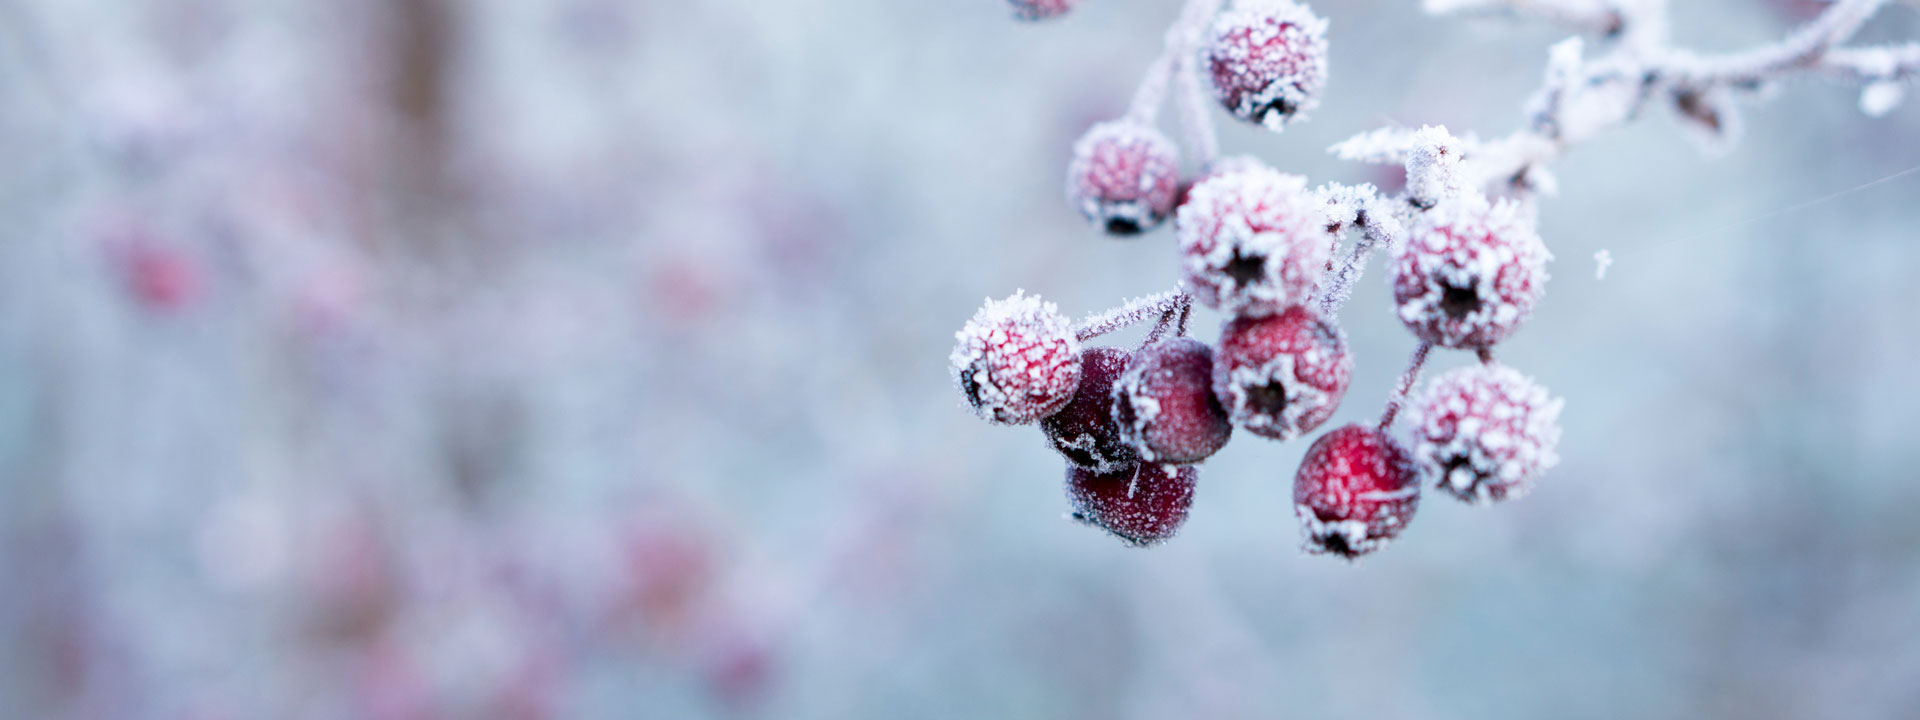 A winter image of cherries/fruit with frost bite.